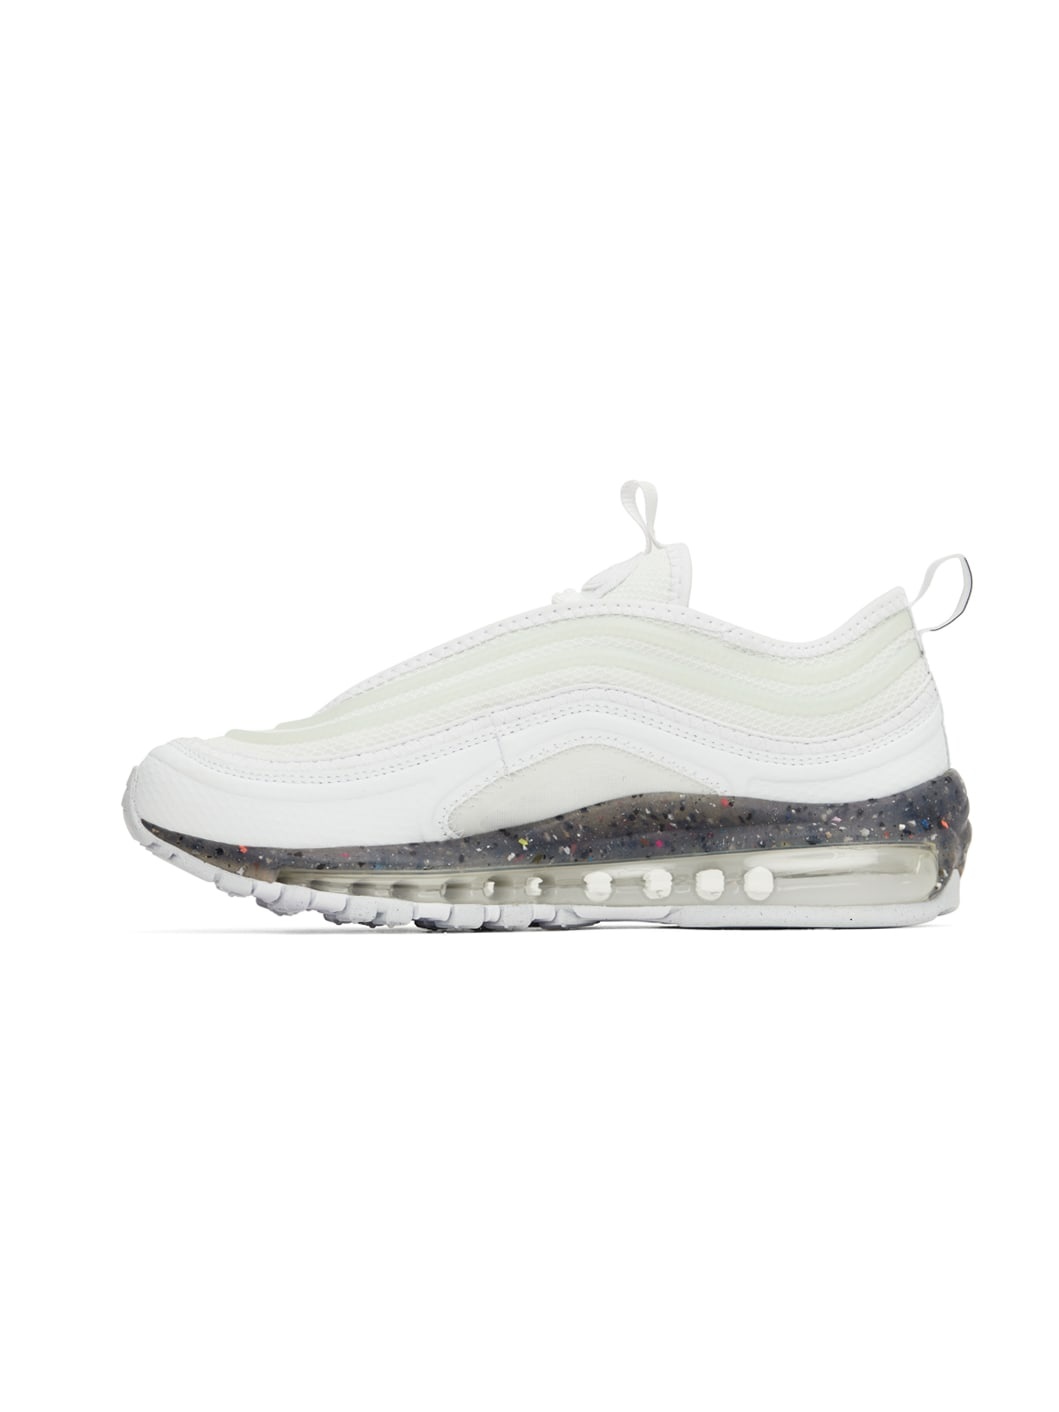 White Air Max Terrascape 97 Sneakers - 3